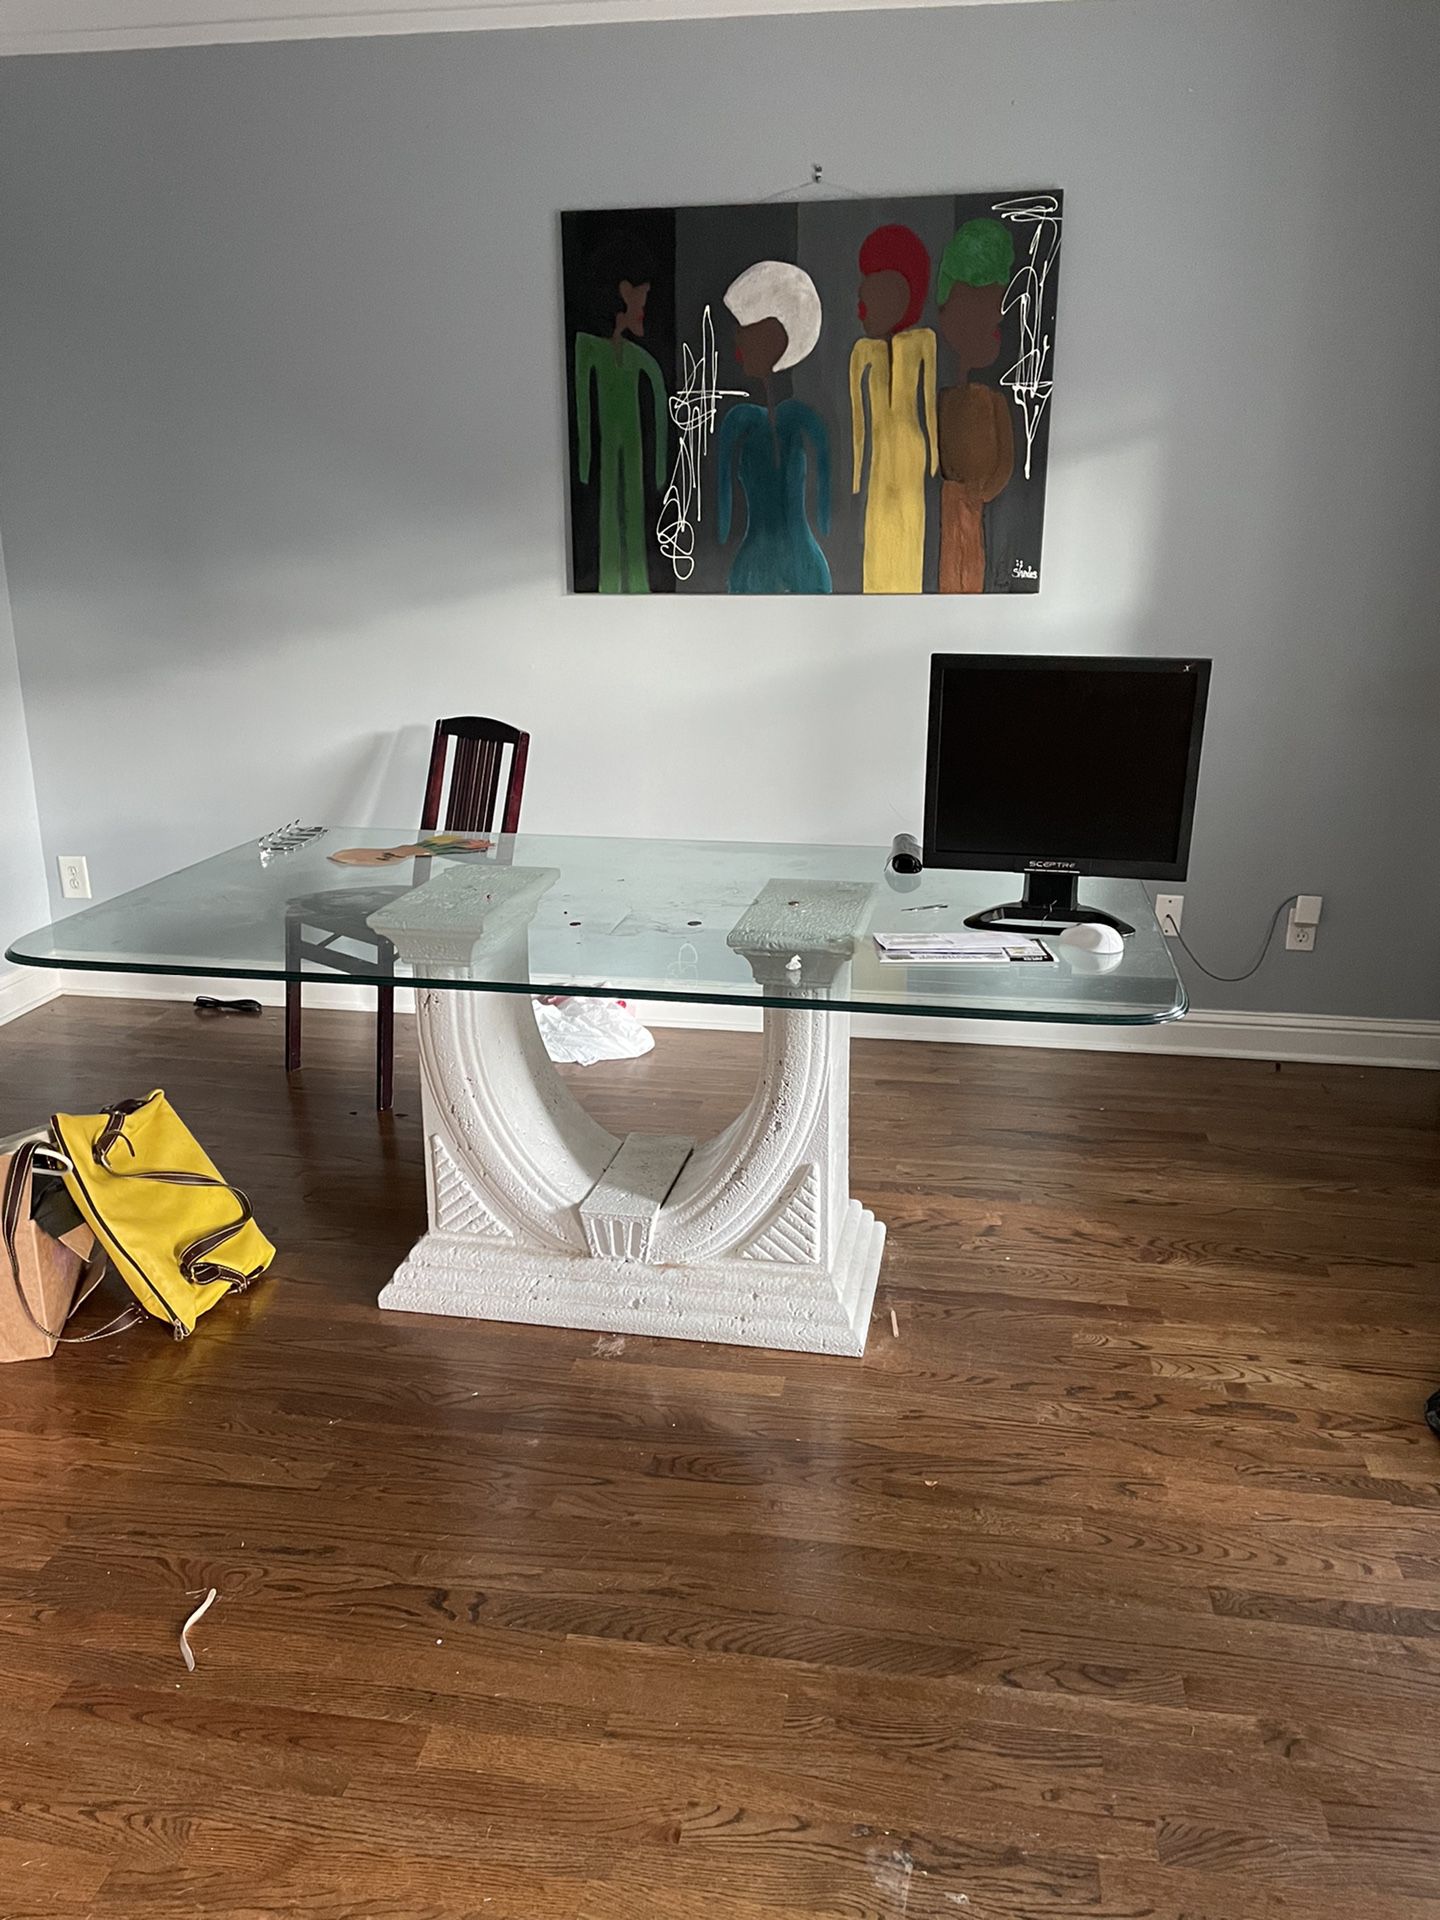 Glass Dining Table Or Desk - $85 Or Best Offer - 41x71 Inches